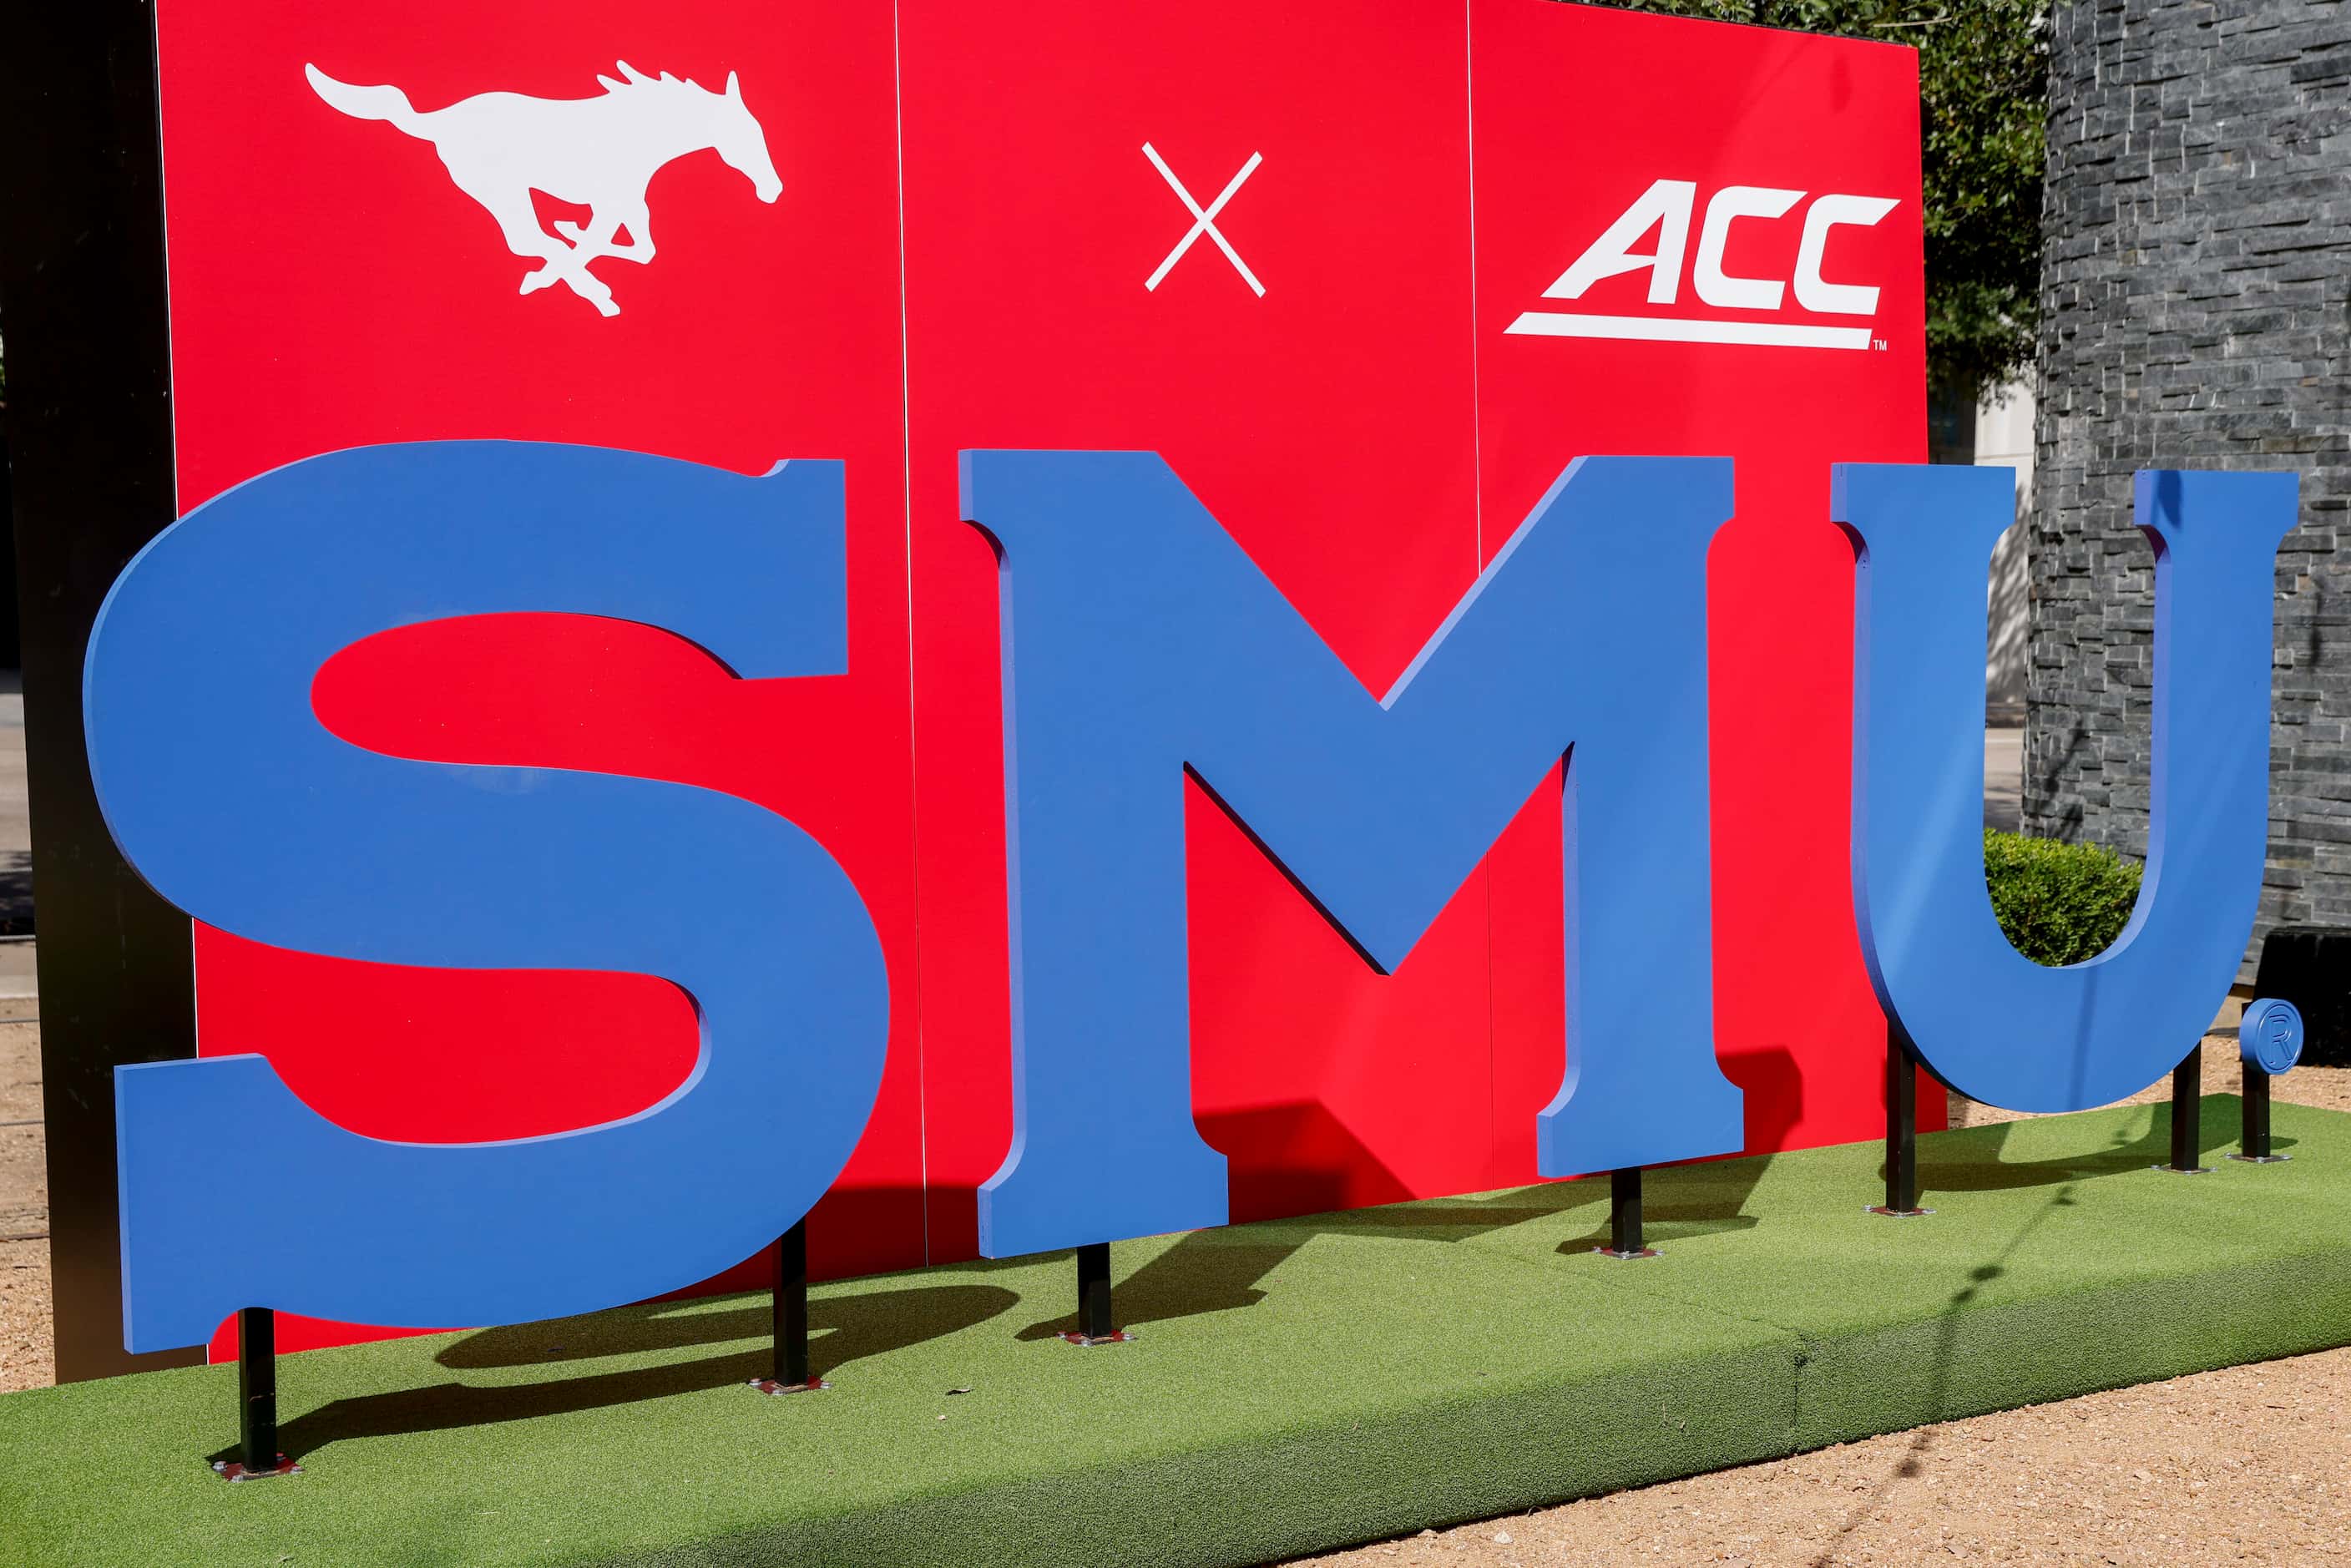 A SMU and ACC sign is seen during a celebration of SMU’s first day in the ACC at Happiest...